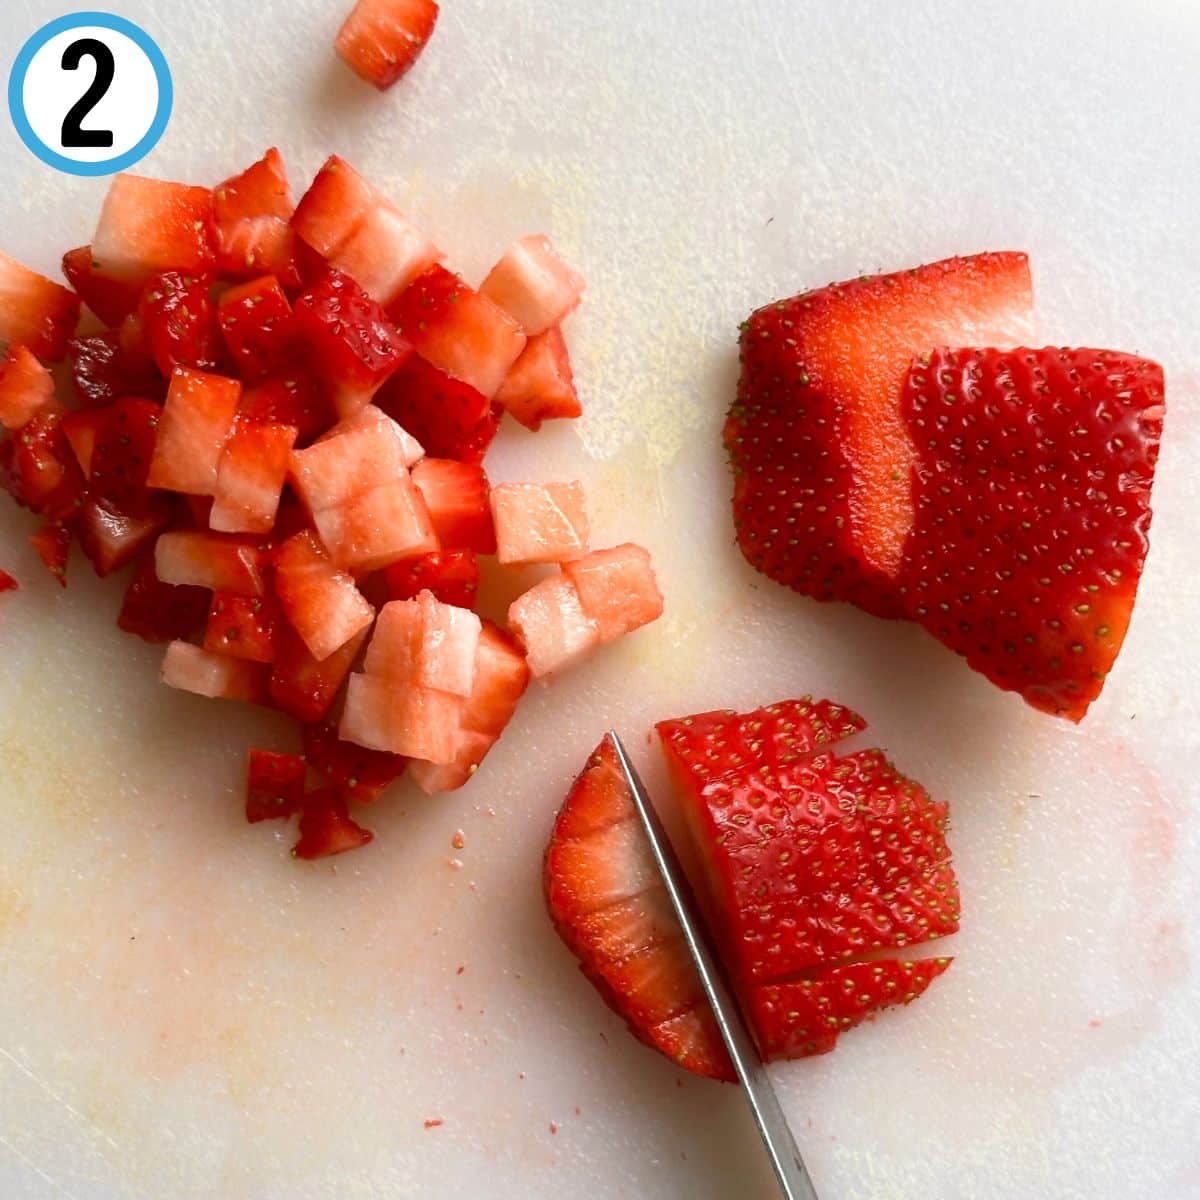 Chopping strawberry finely.